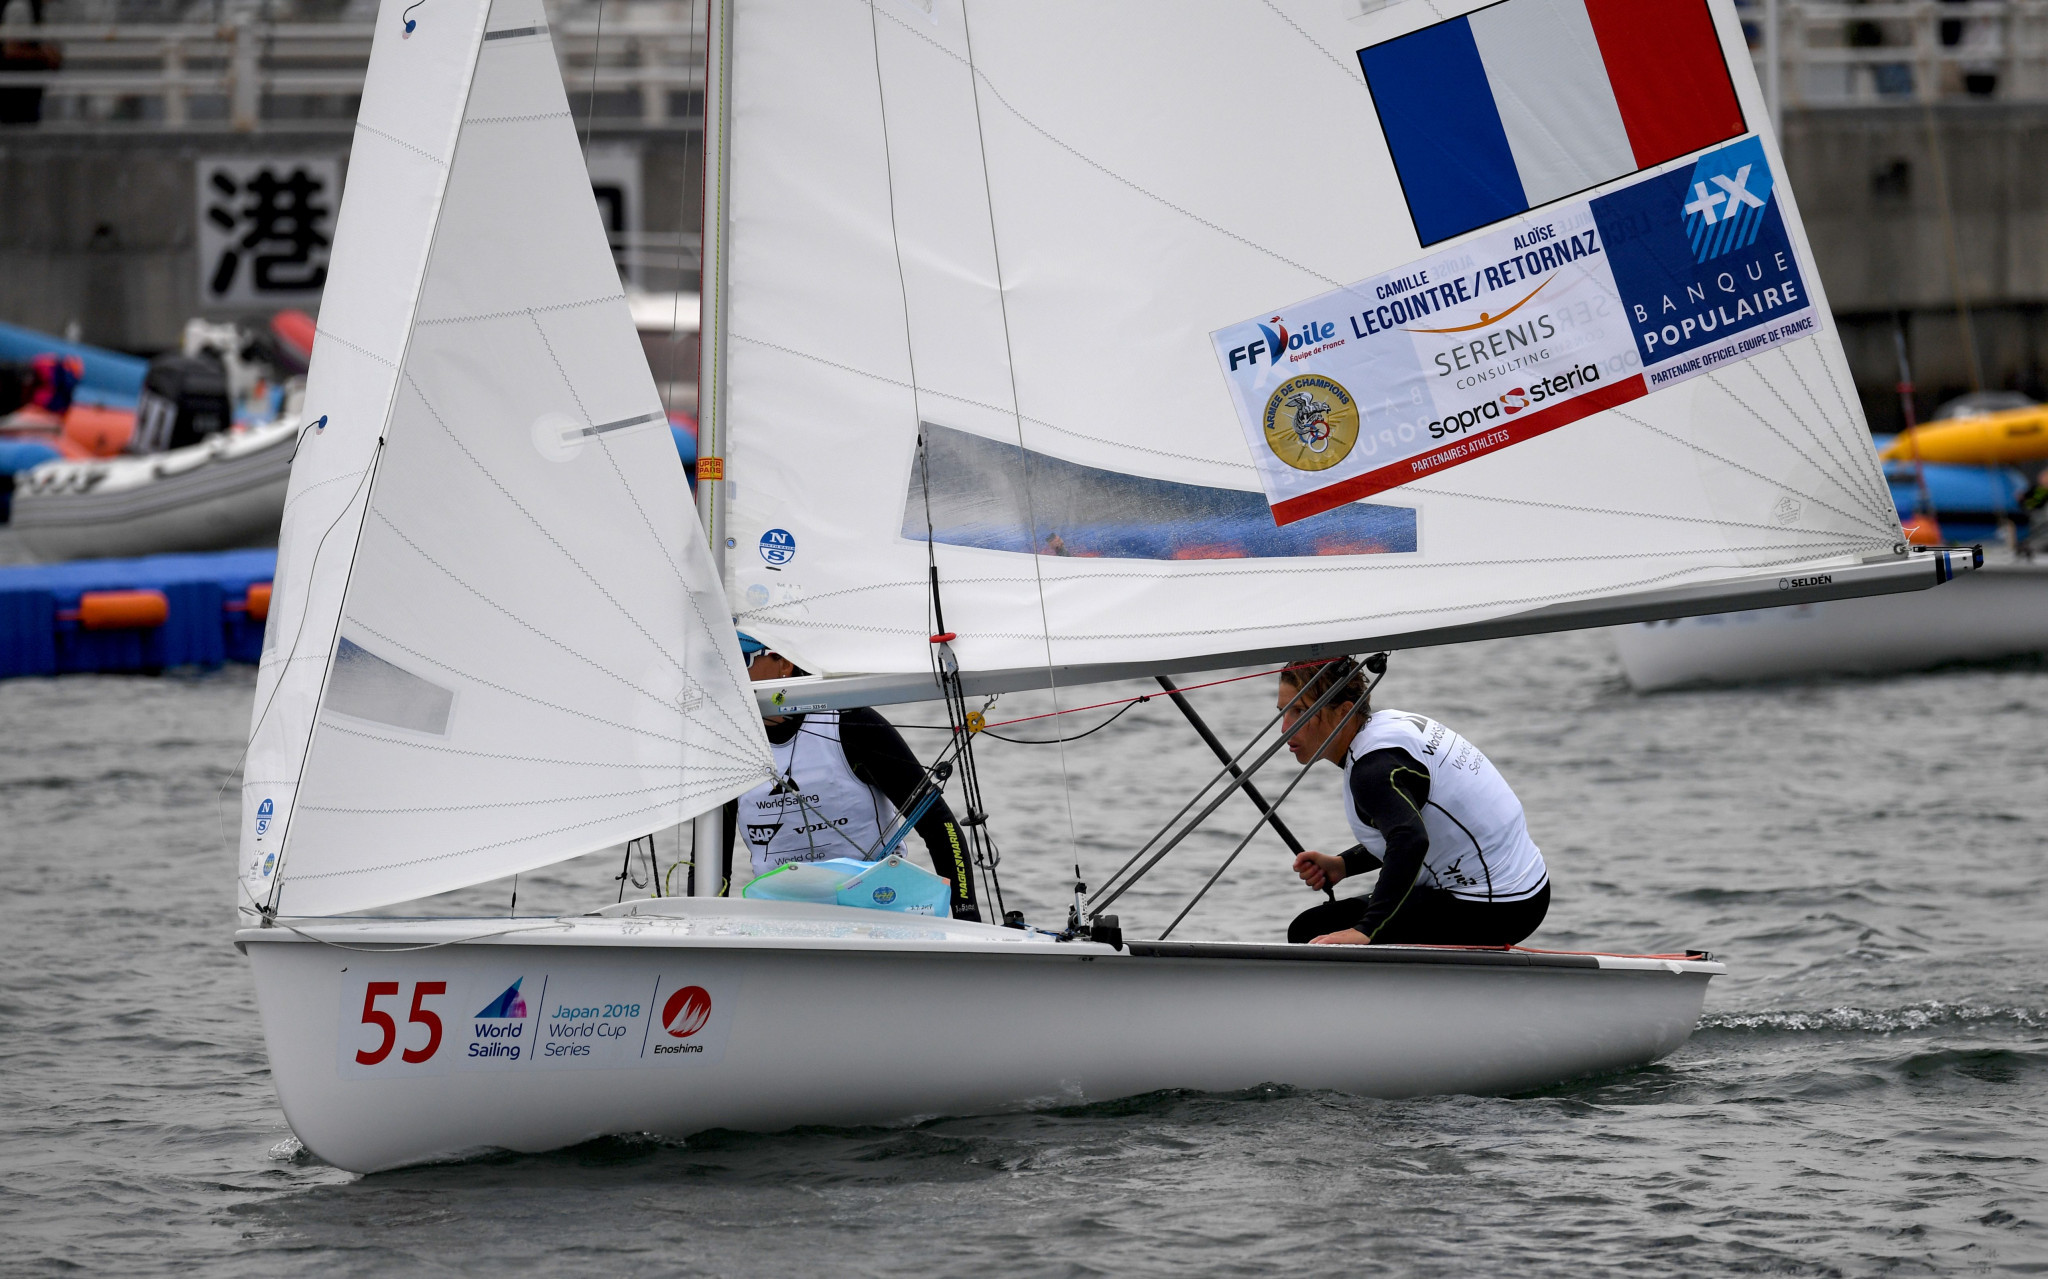 France's Camille Lecointre and Aloise Retornaz will be among the favourites in the women's event ©Getty Images